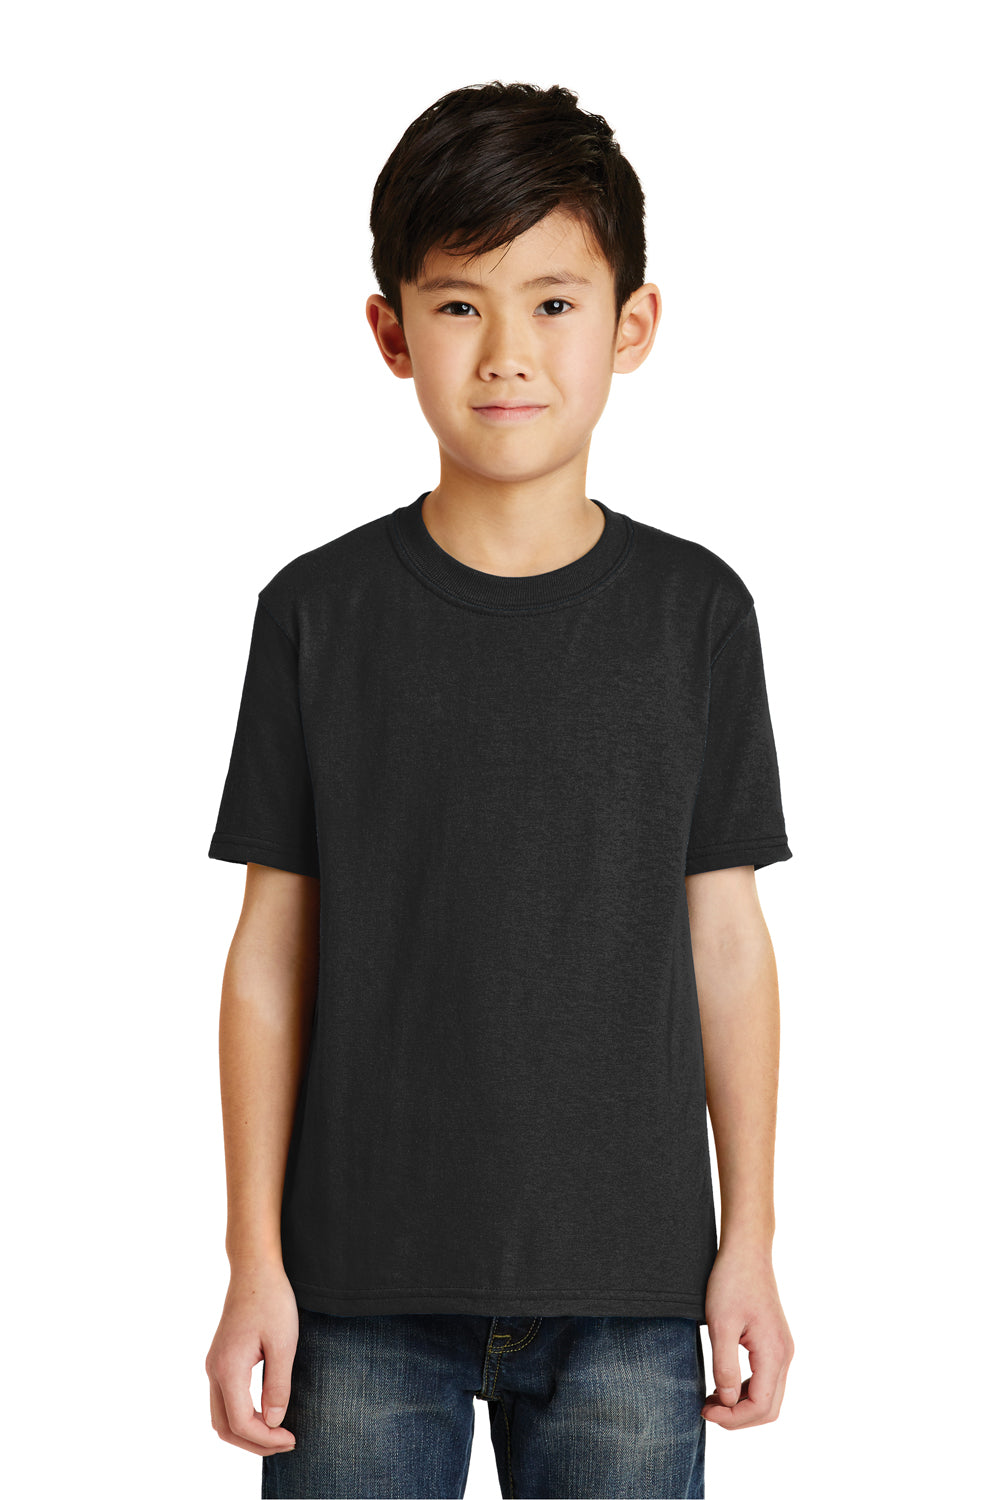 Port & Company PC55Y Youth Core Short Sleeve Crewneck T-Shirt Black Front